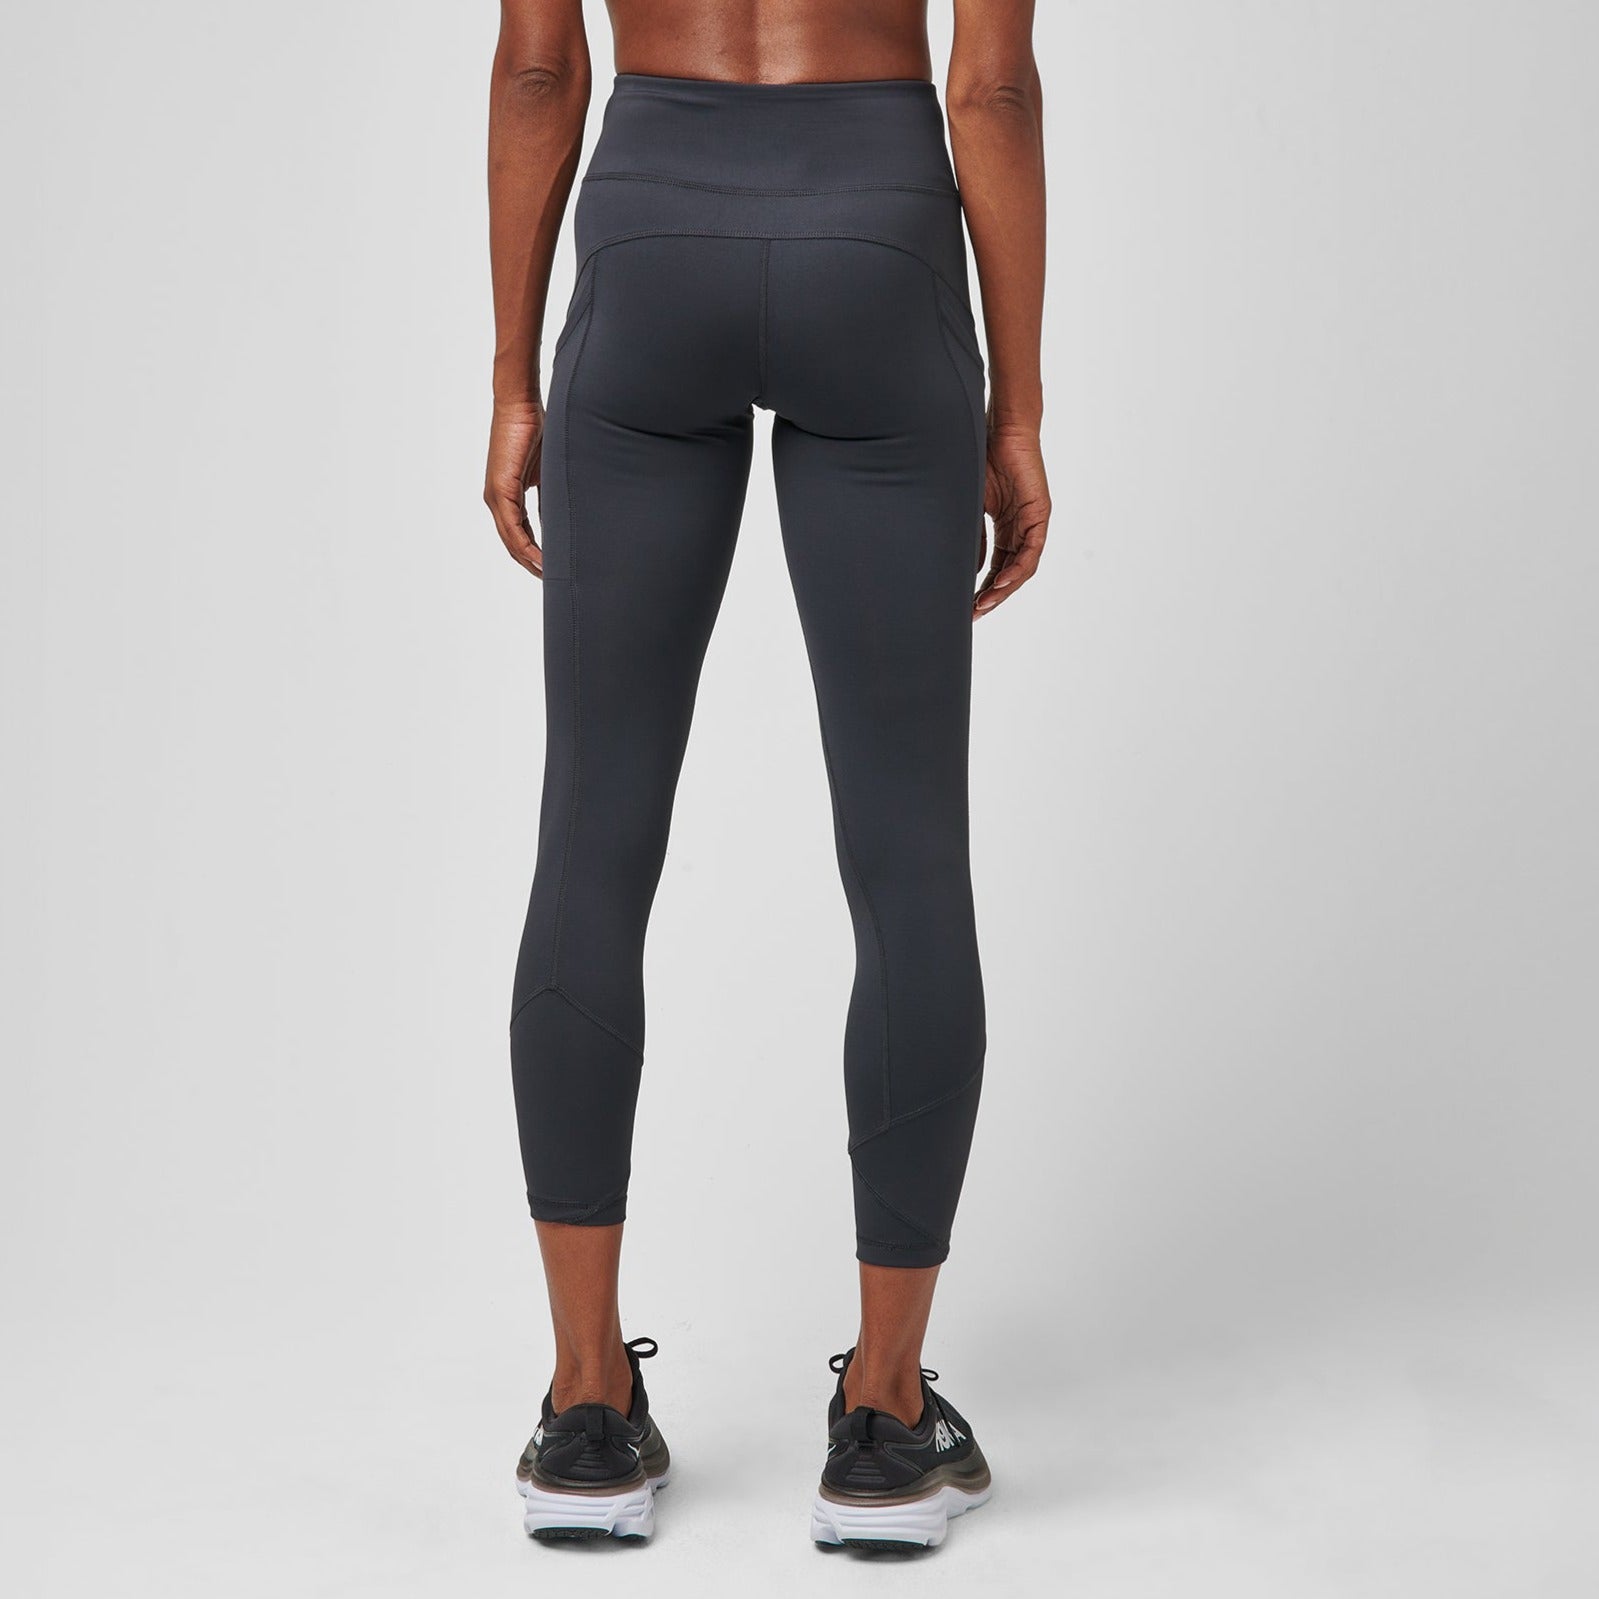 HIGH OUTPUT SPORTS LEGGING Black – Greatness Wins